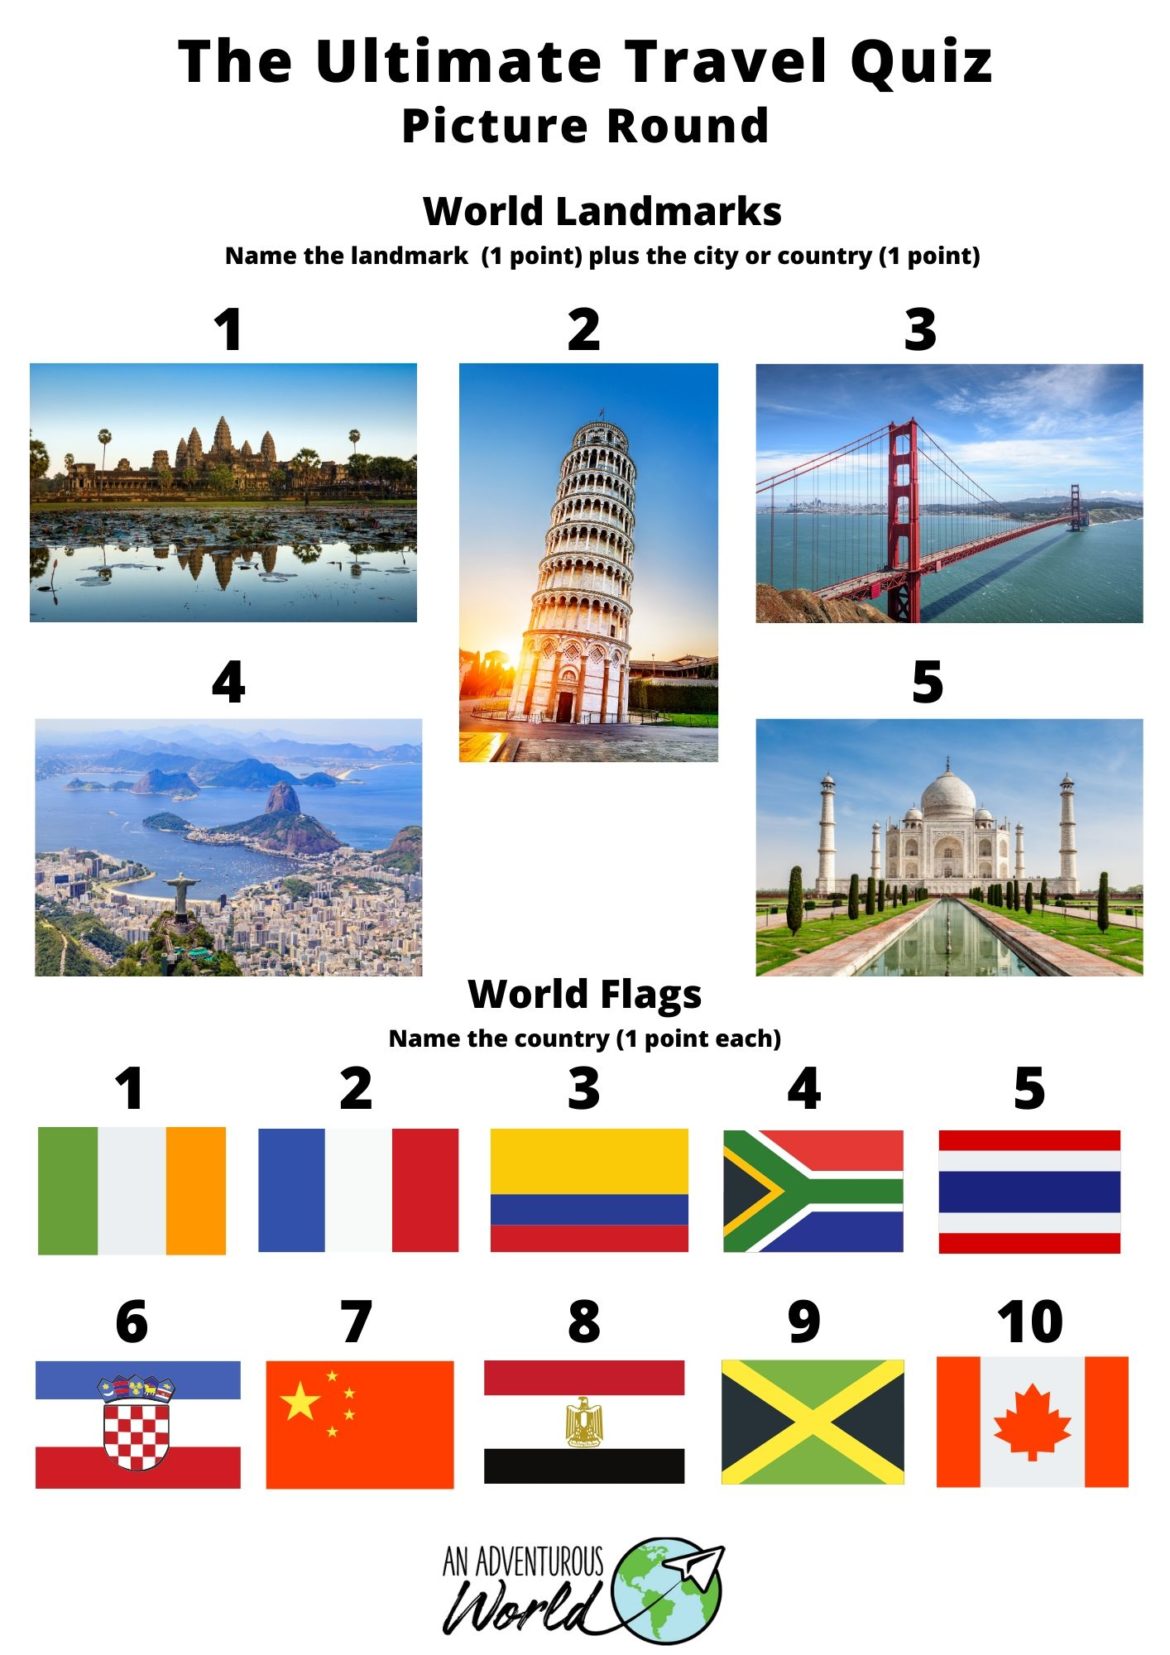 travel quiz questions with answers